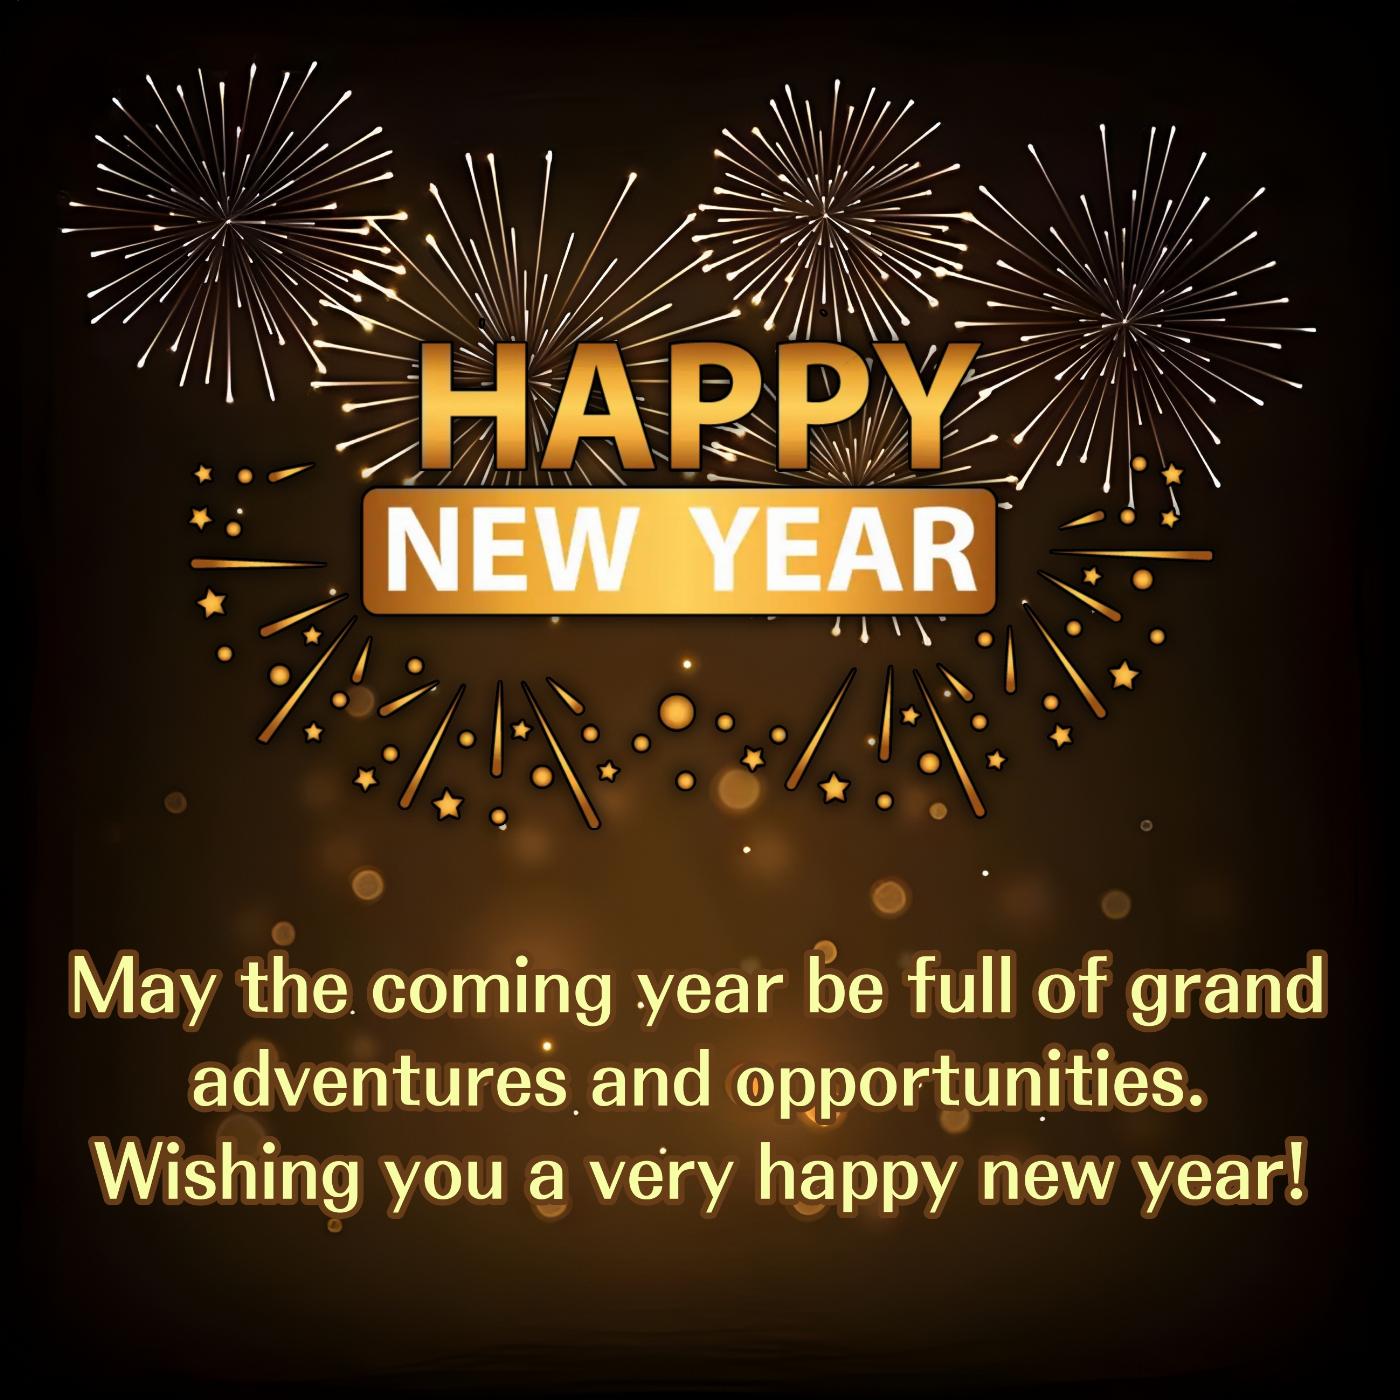 May the coming year be full of grand adventures and opportunities